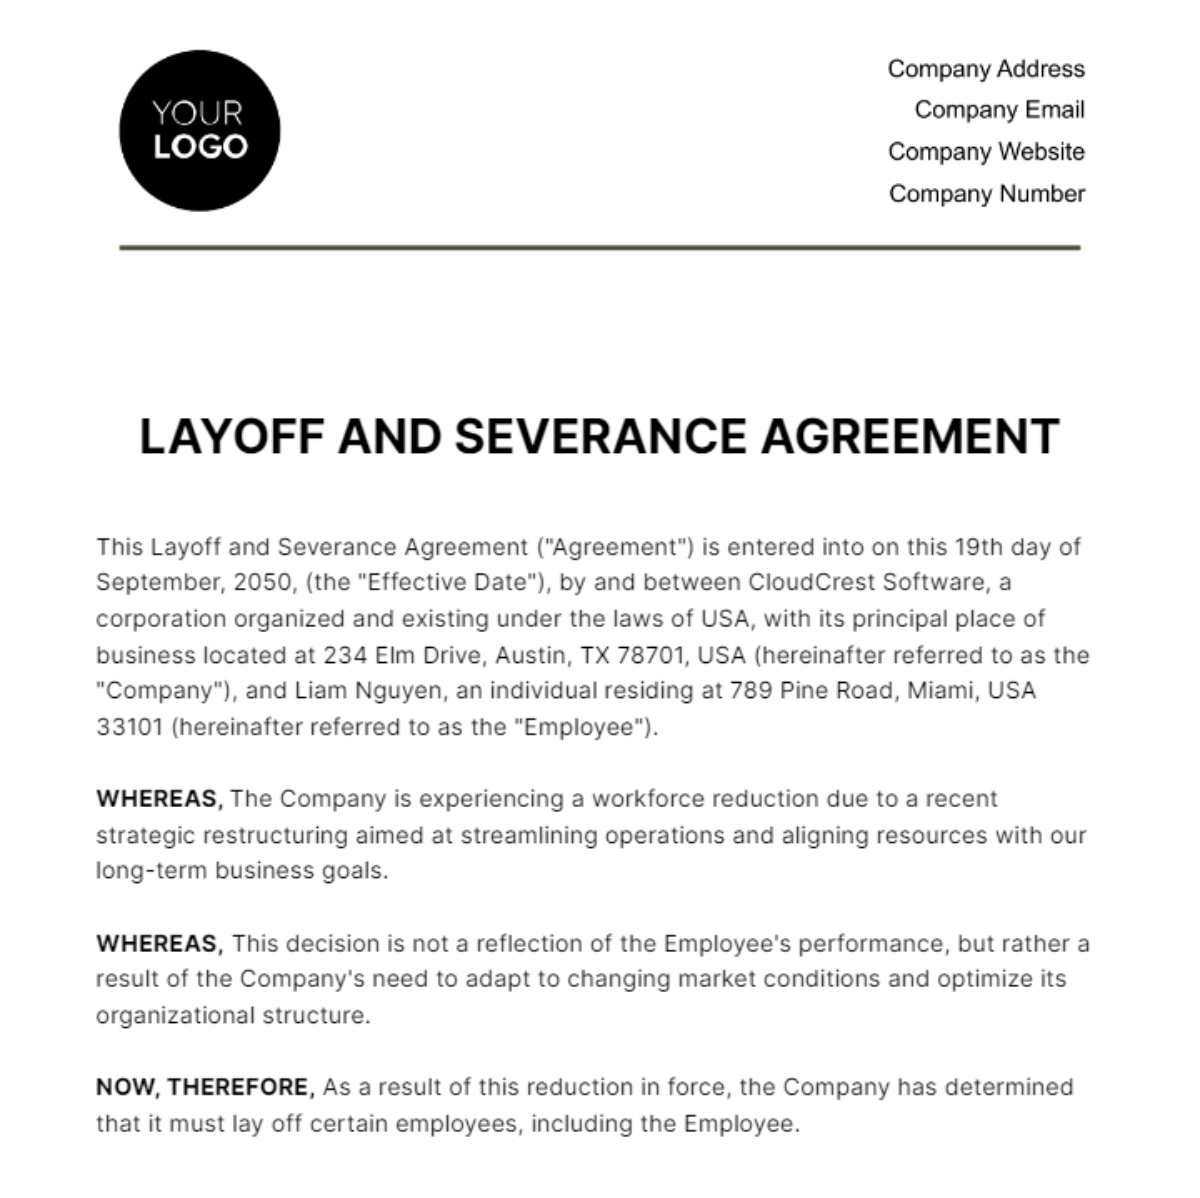 Layoff and Severance Agreement HR Template